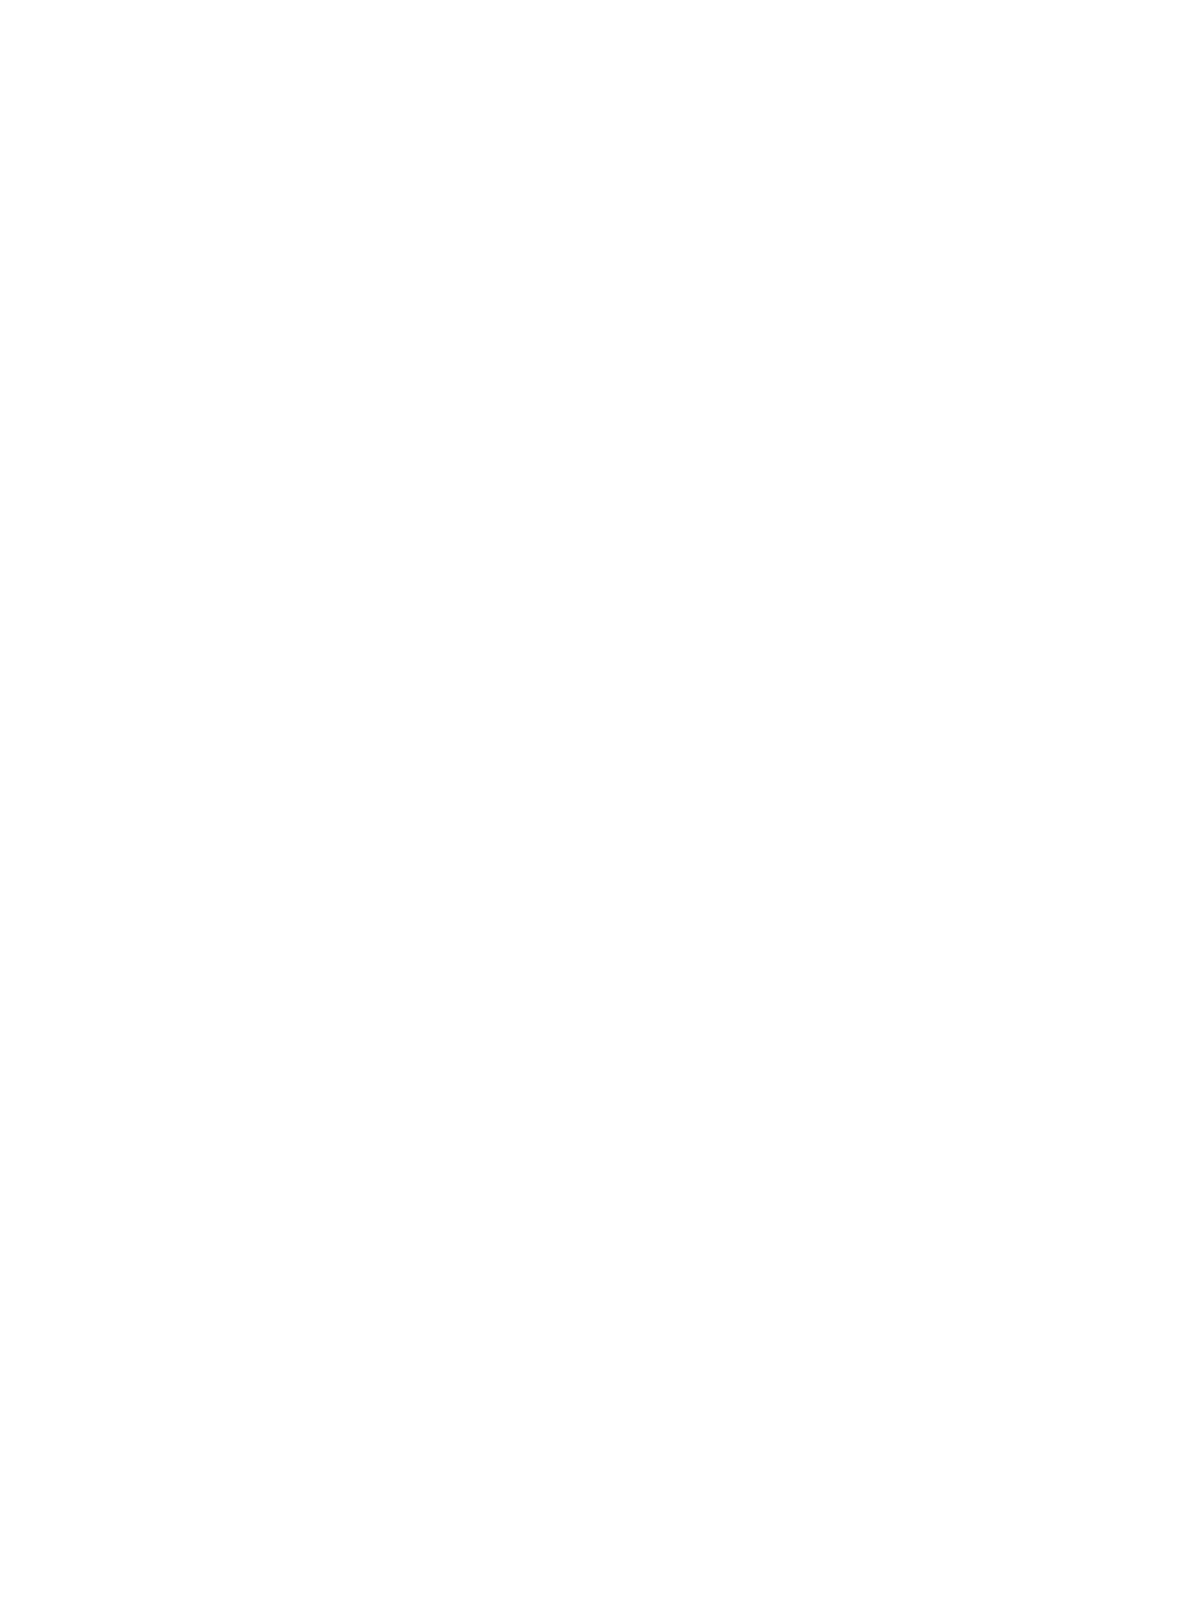 This logo is for "Pixel Poet" the company name used by Andrew Harry Conroy. He is a freelance video editer, script writer, and motion graphics artist.